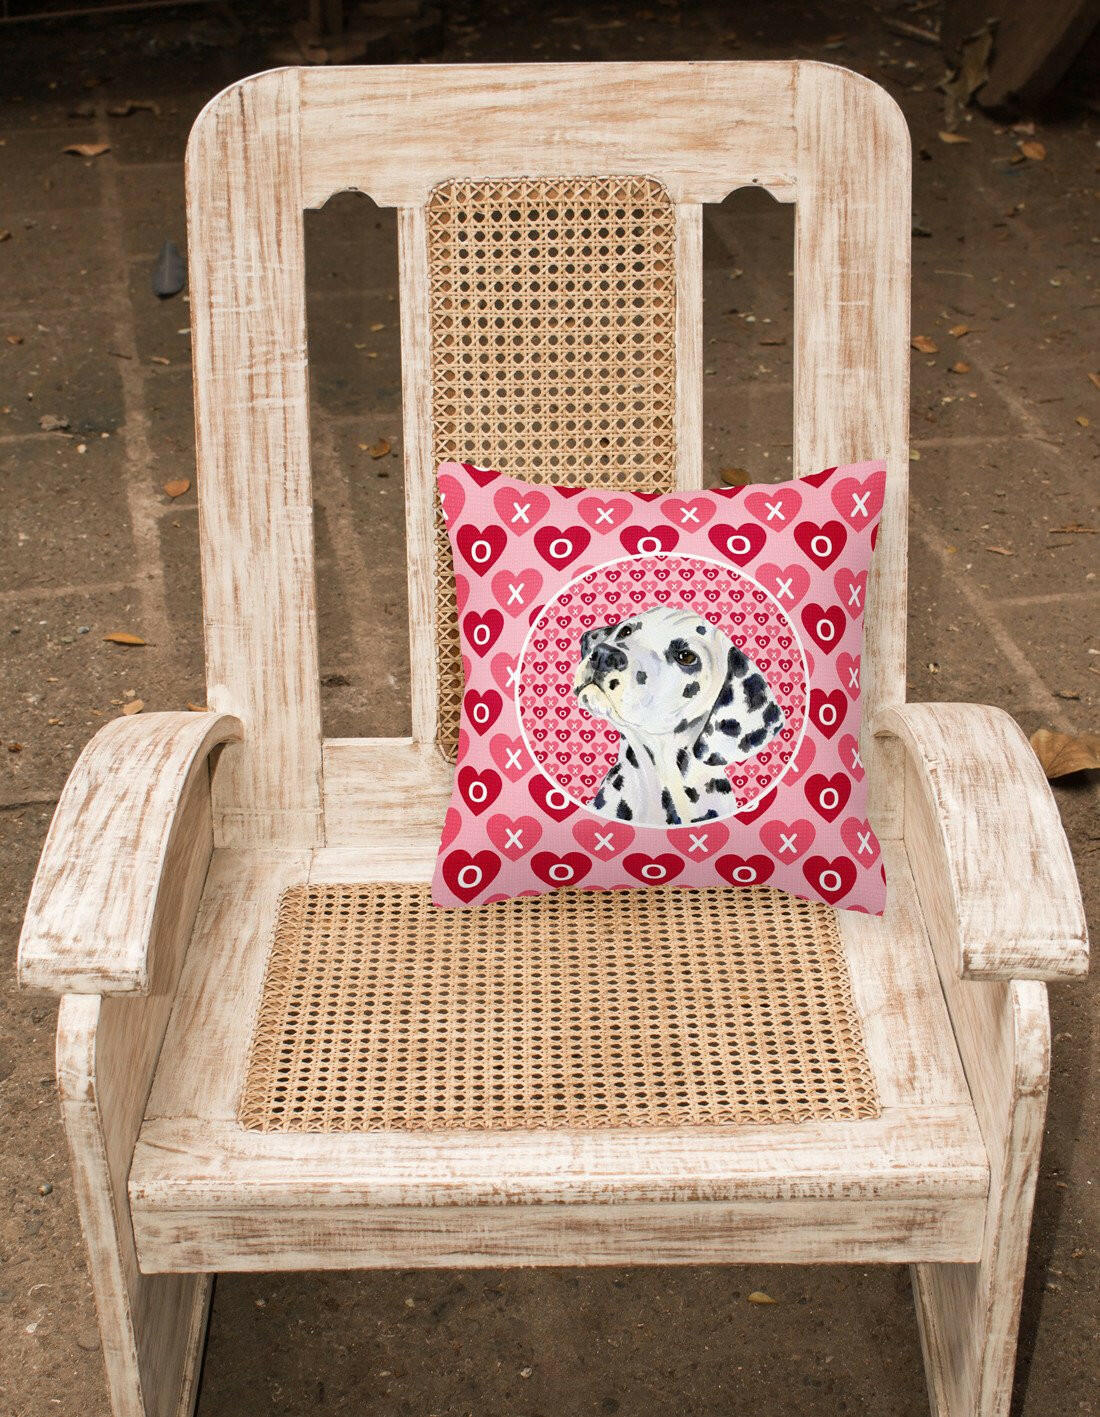 Dalmatian Hearts Love and Valentine's Day Portrait Fabric Decorative Pillow SS4492PW1414 by Caroline's Treasures